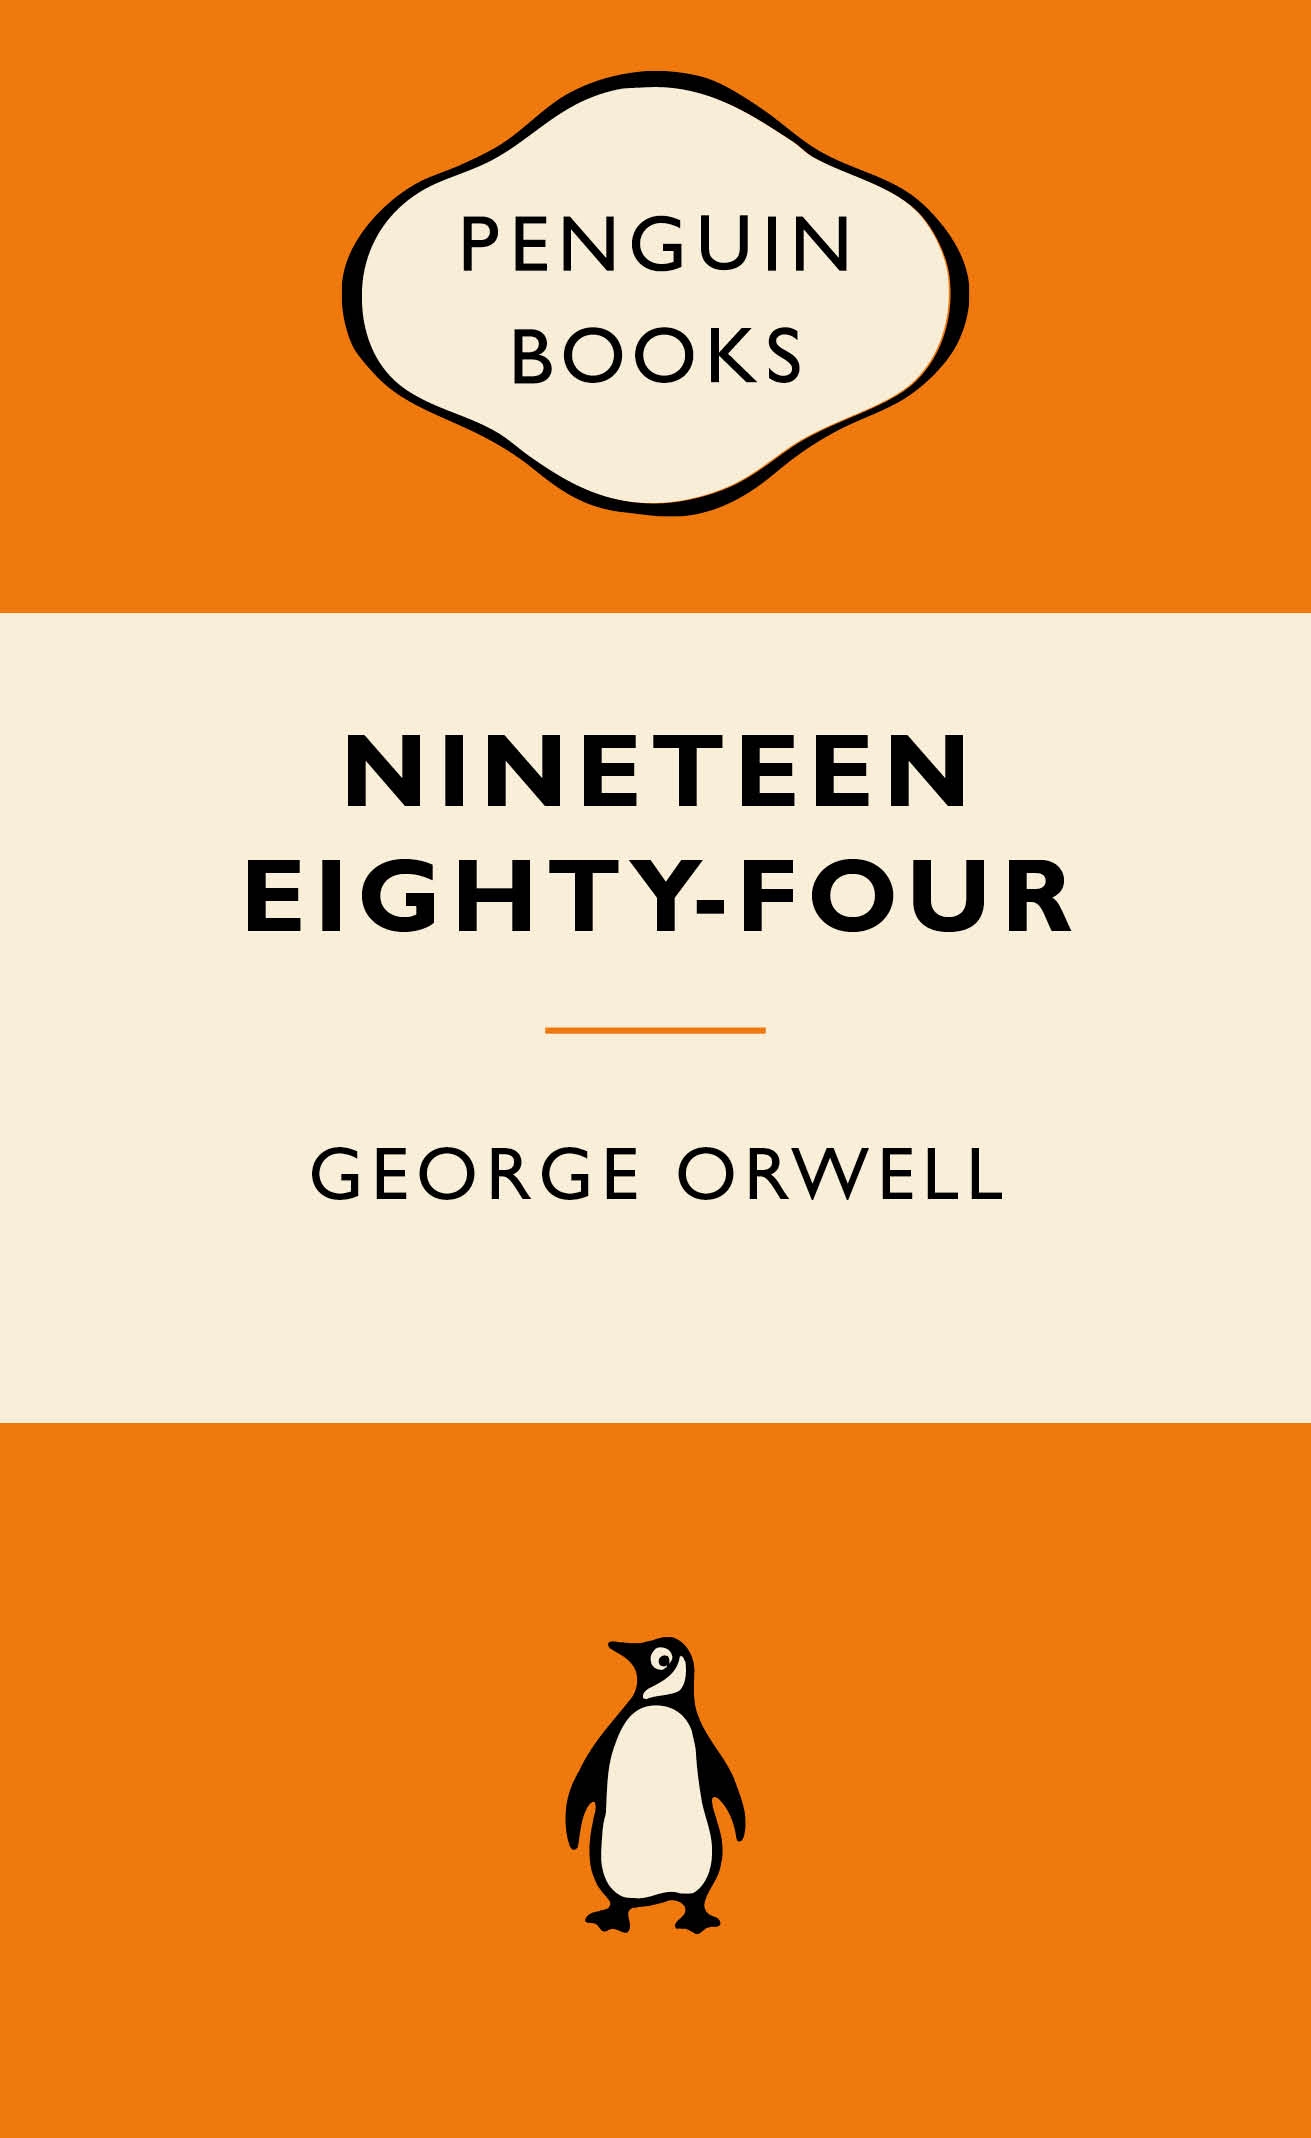 1984 By George Orwell Penguin Books New Zealand 2660